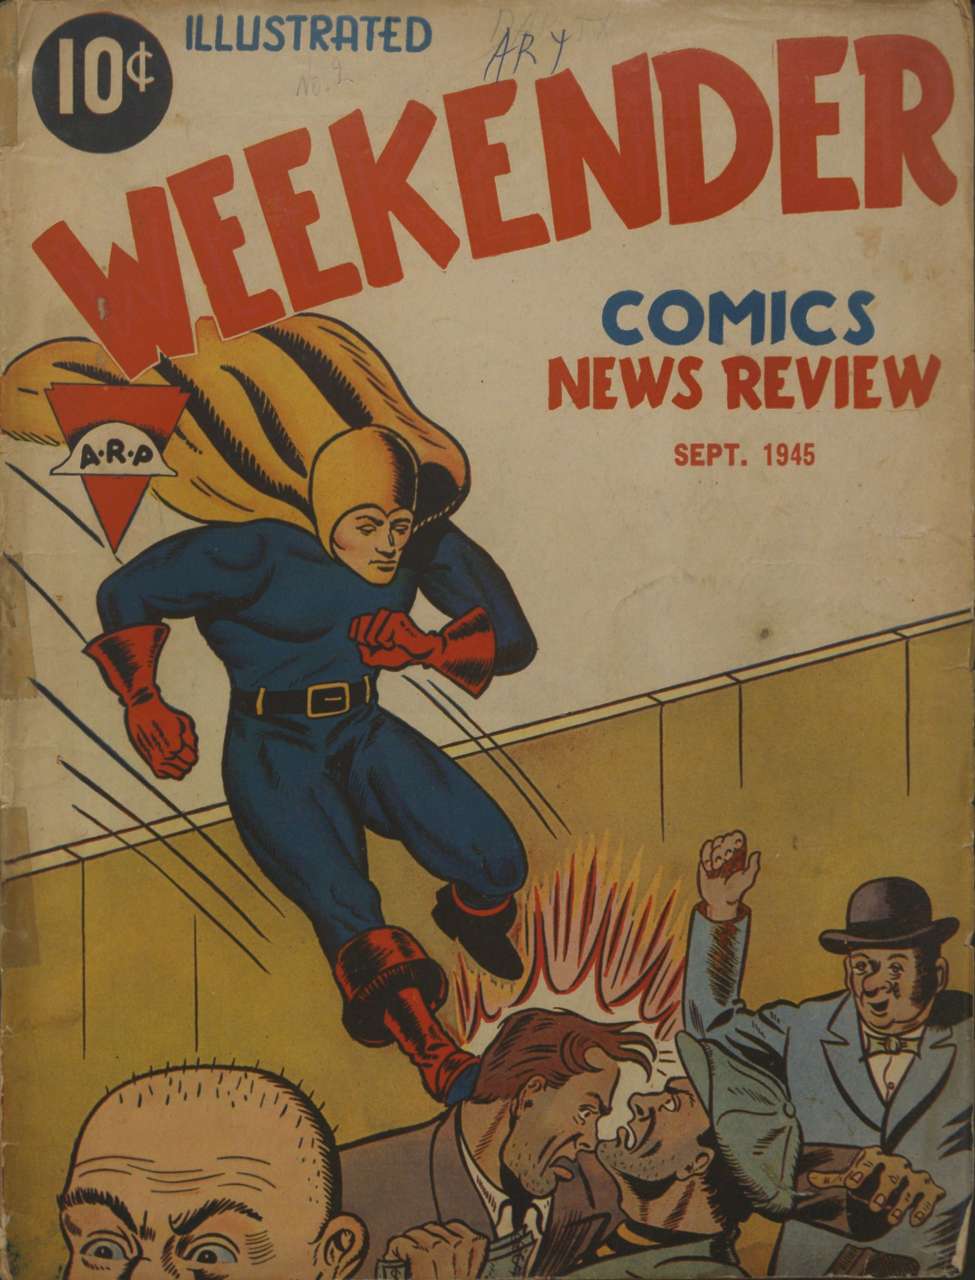 Book Cover For Weekender Comics 3